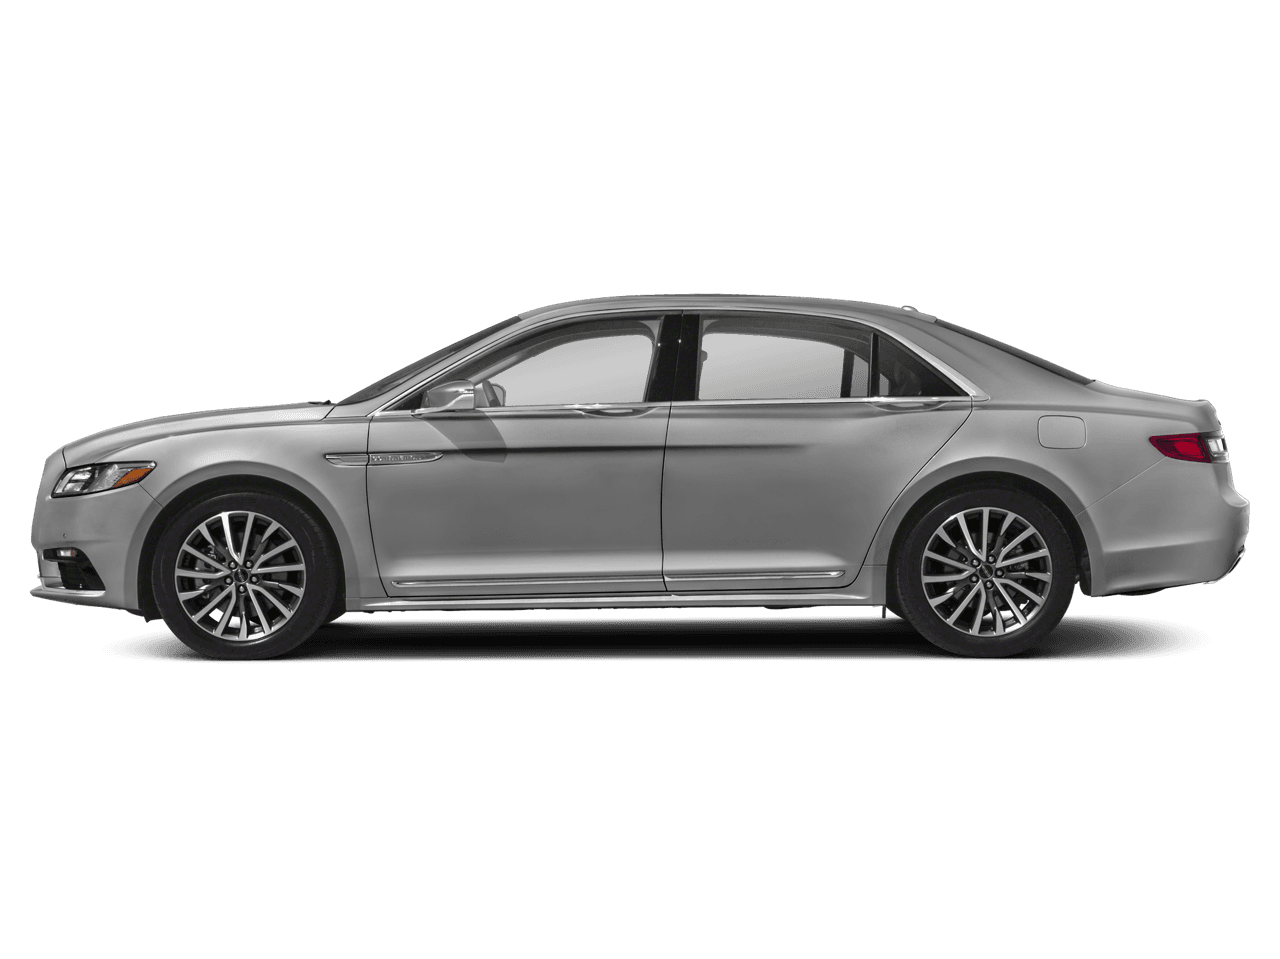 2020 Lincoln Continental Photo in Bethesda, MD 20814